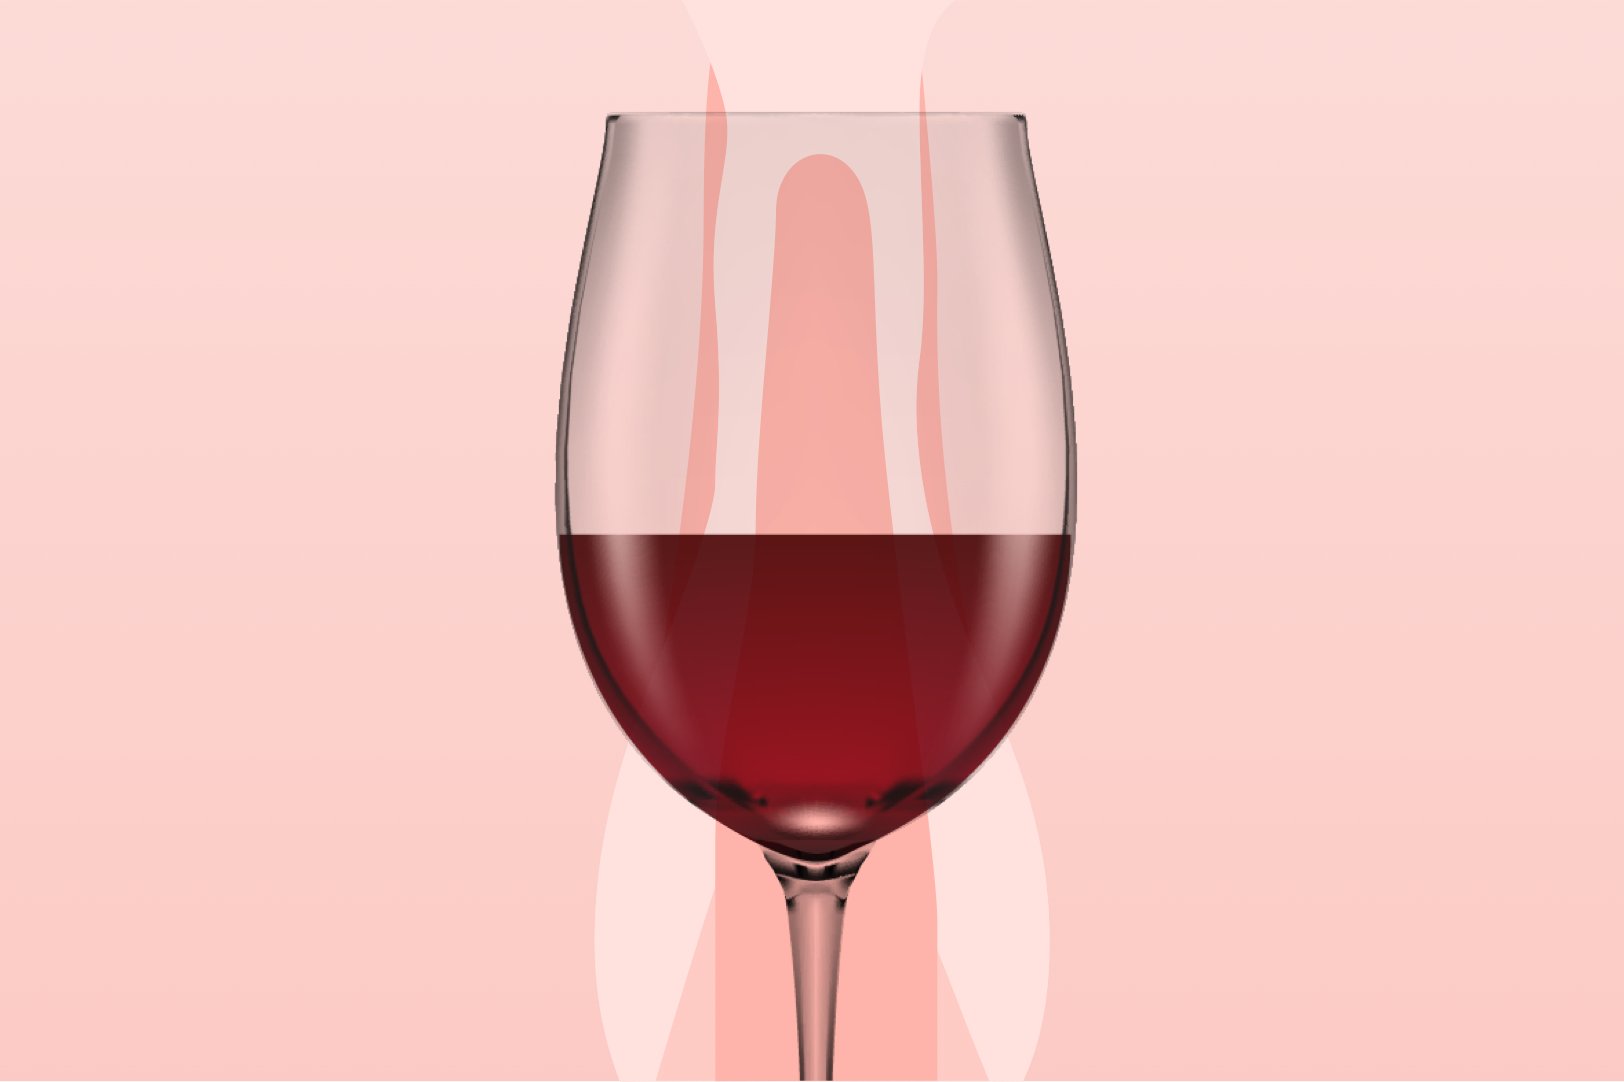 What Do Vaginas and Wine Have in Common?